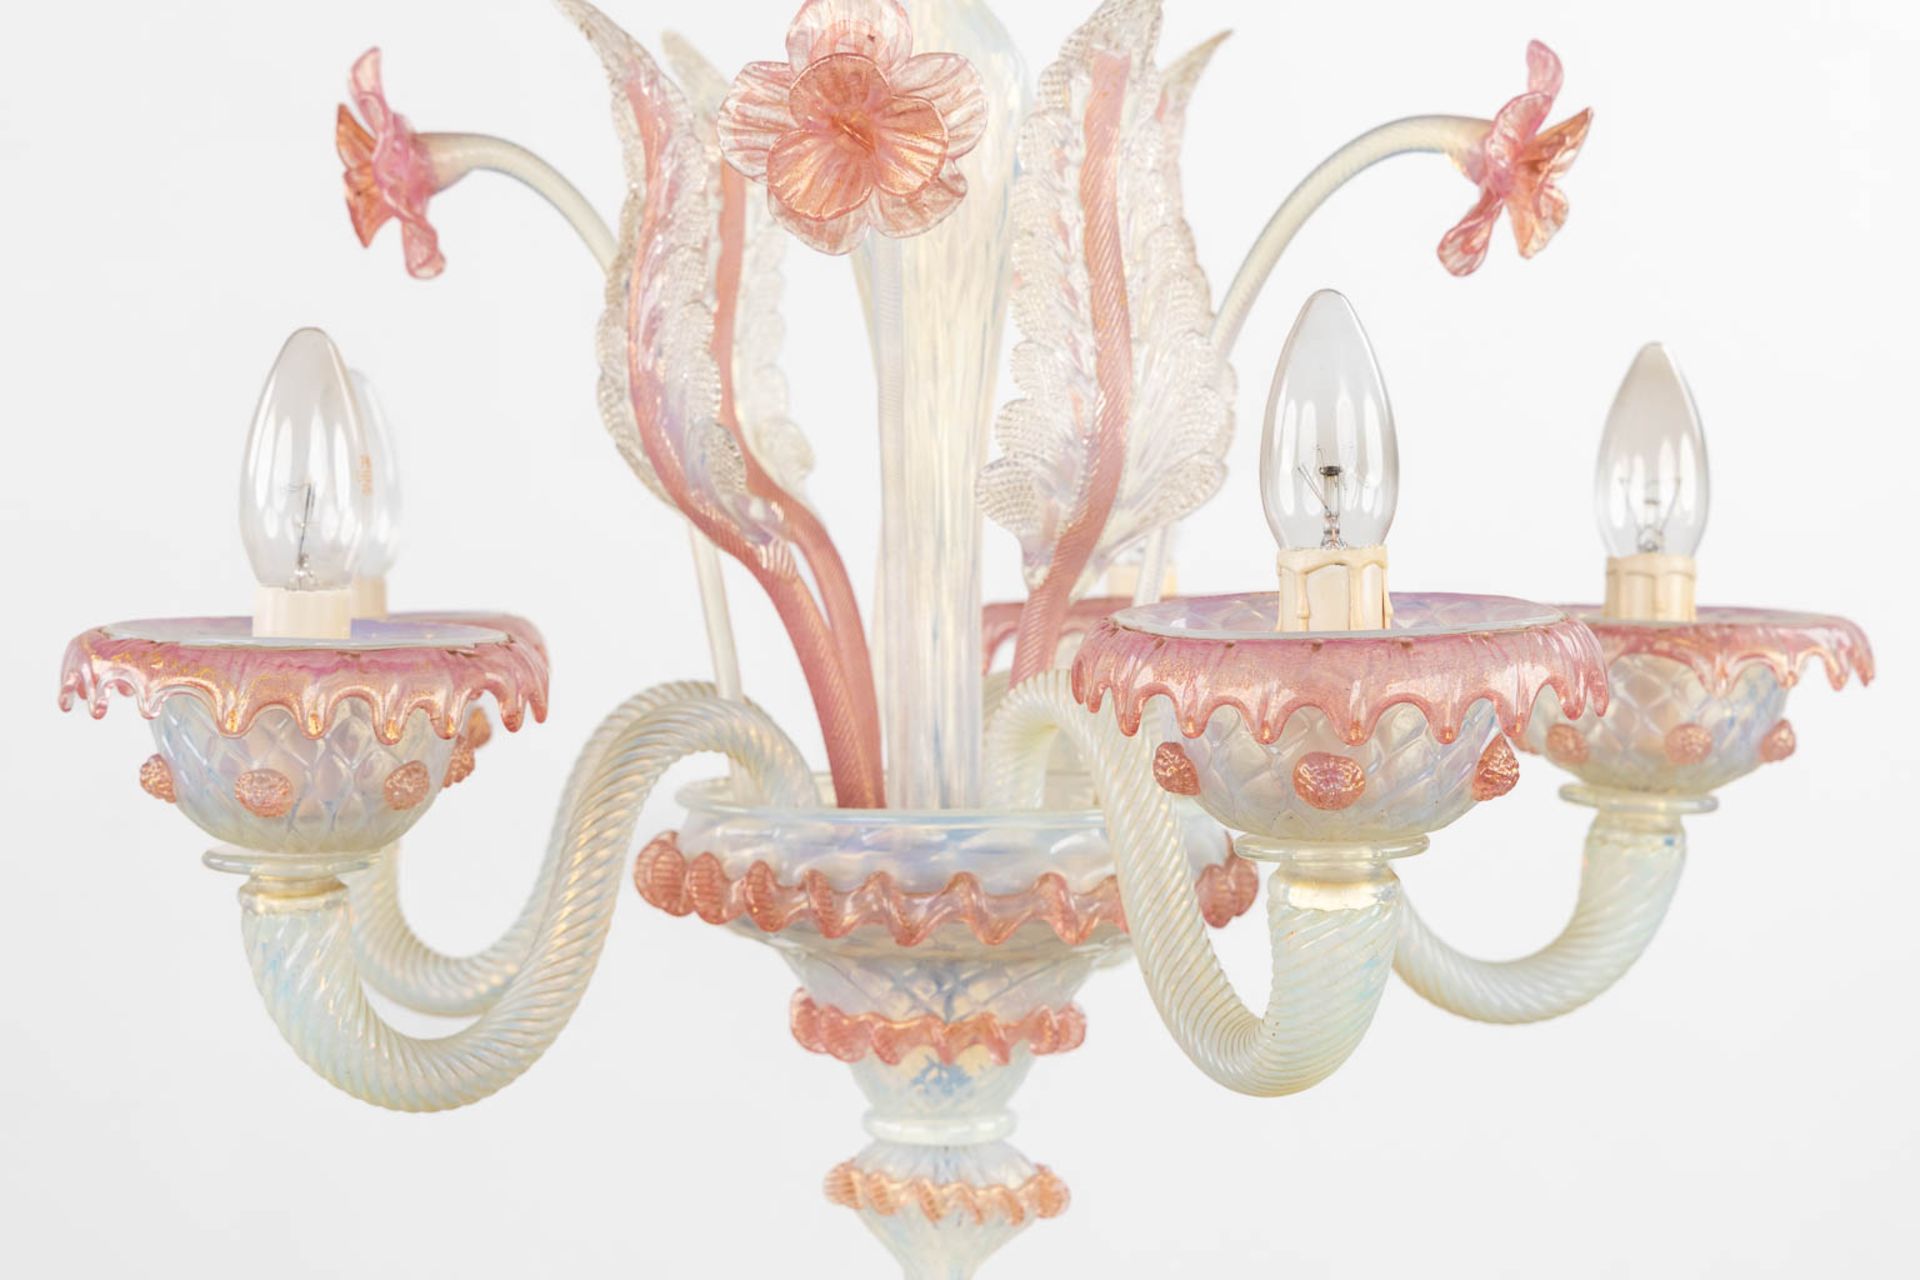 A decorative Venetian glass chandelier, red and white glass. 20th C. (H:70 x D:54 cm) - Image 6 of 12